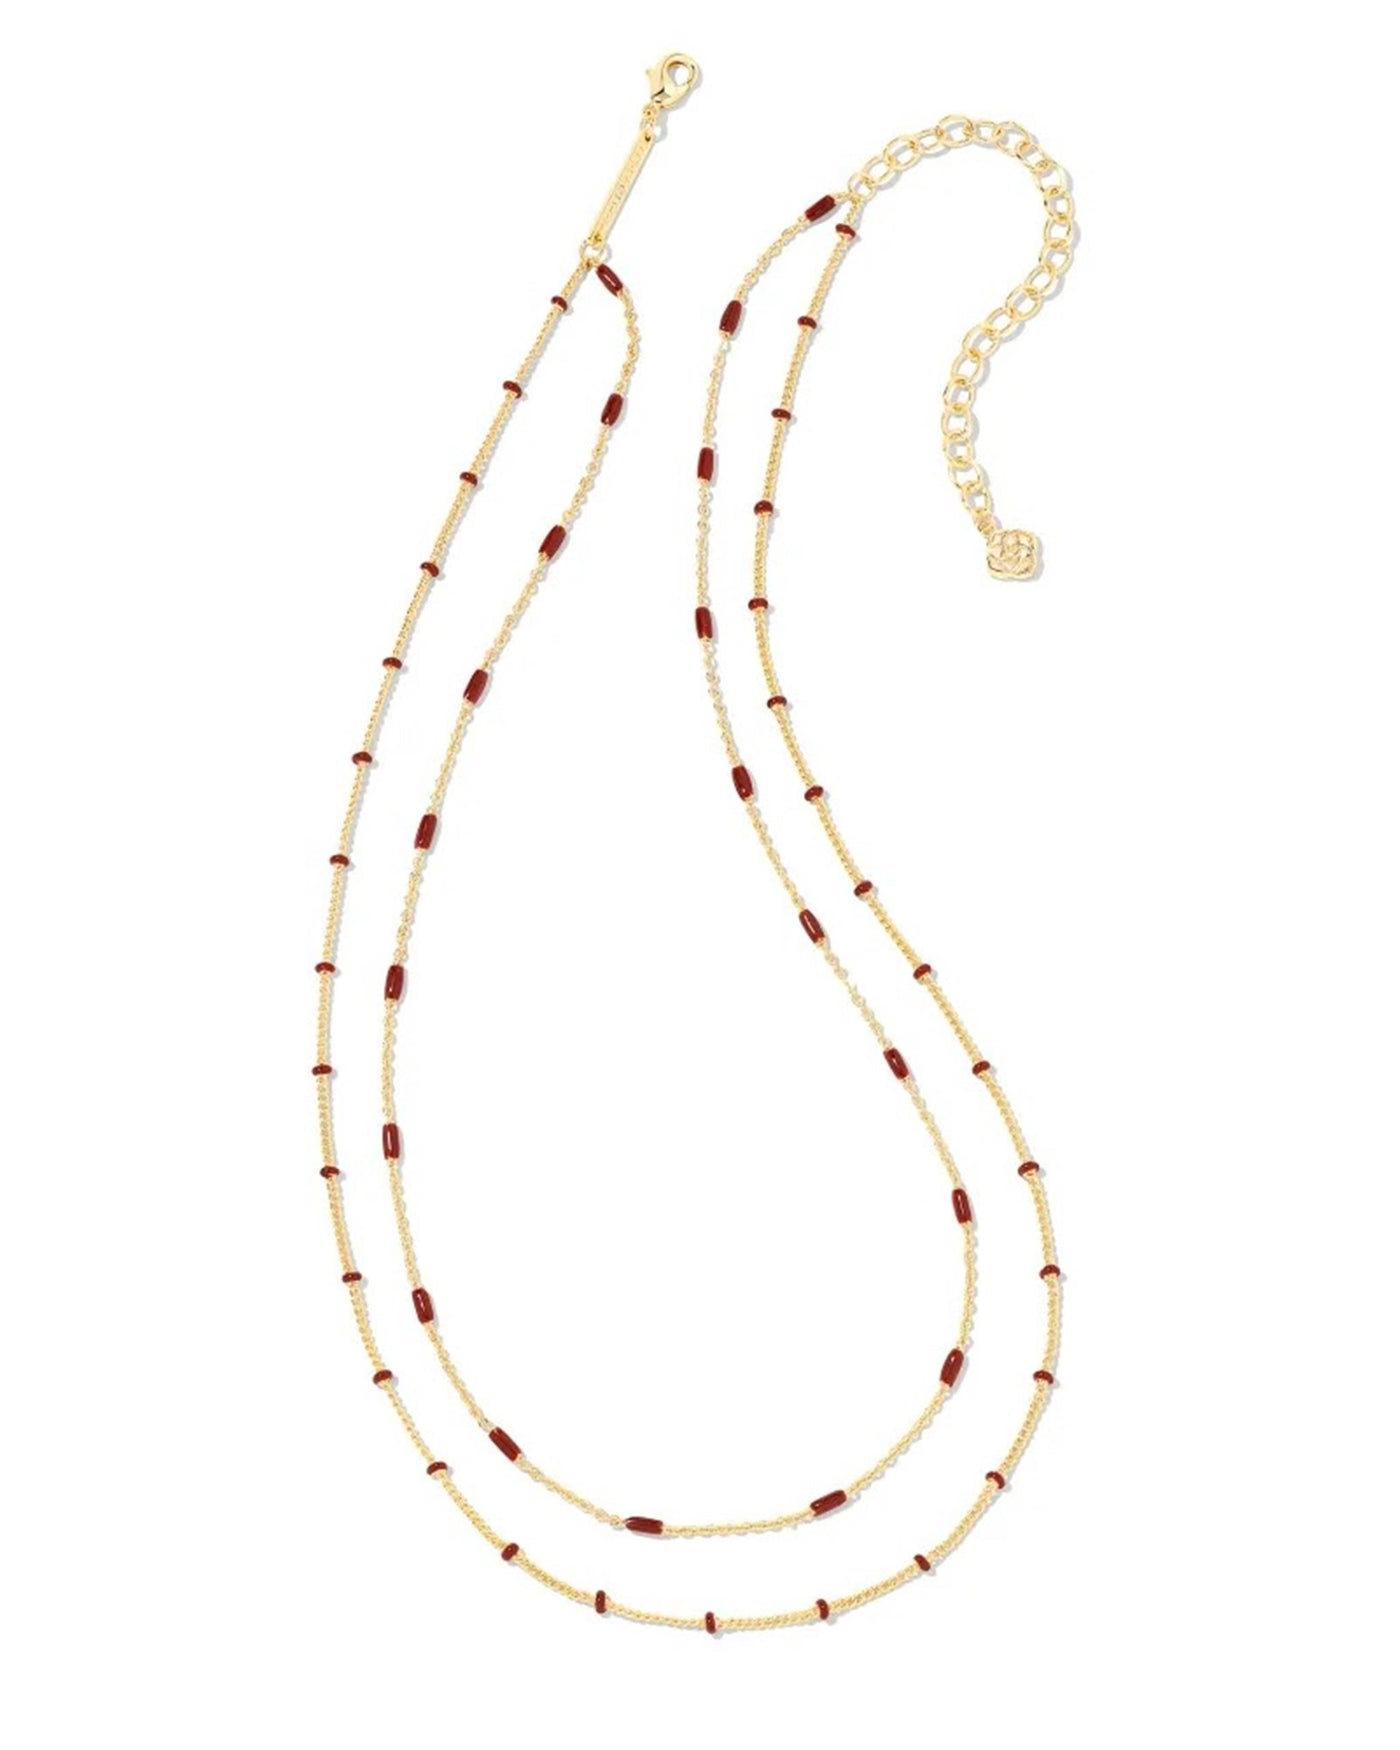 Gold Tone Necklace Featuring Burgundy Enamel by Kendra Scott